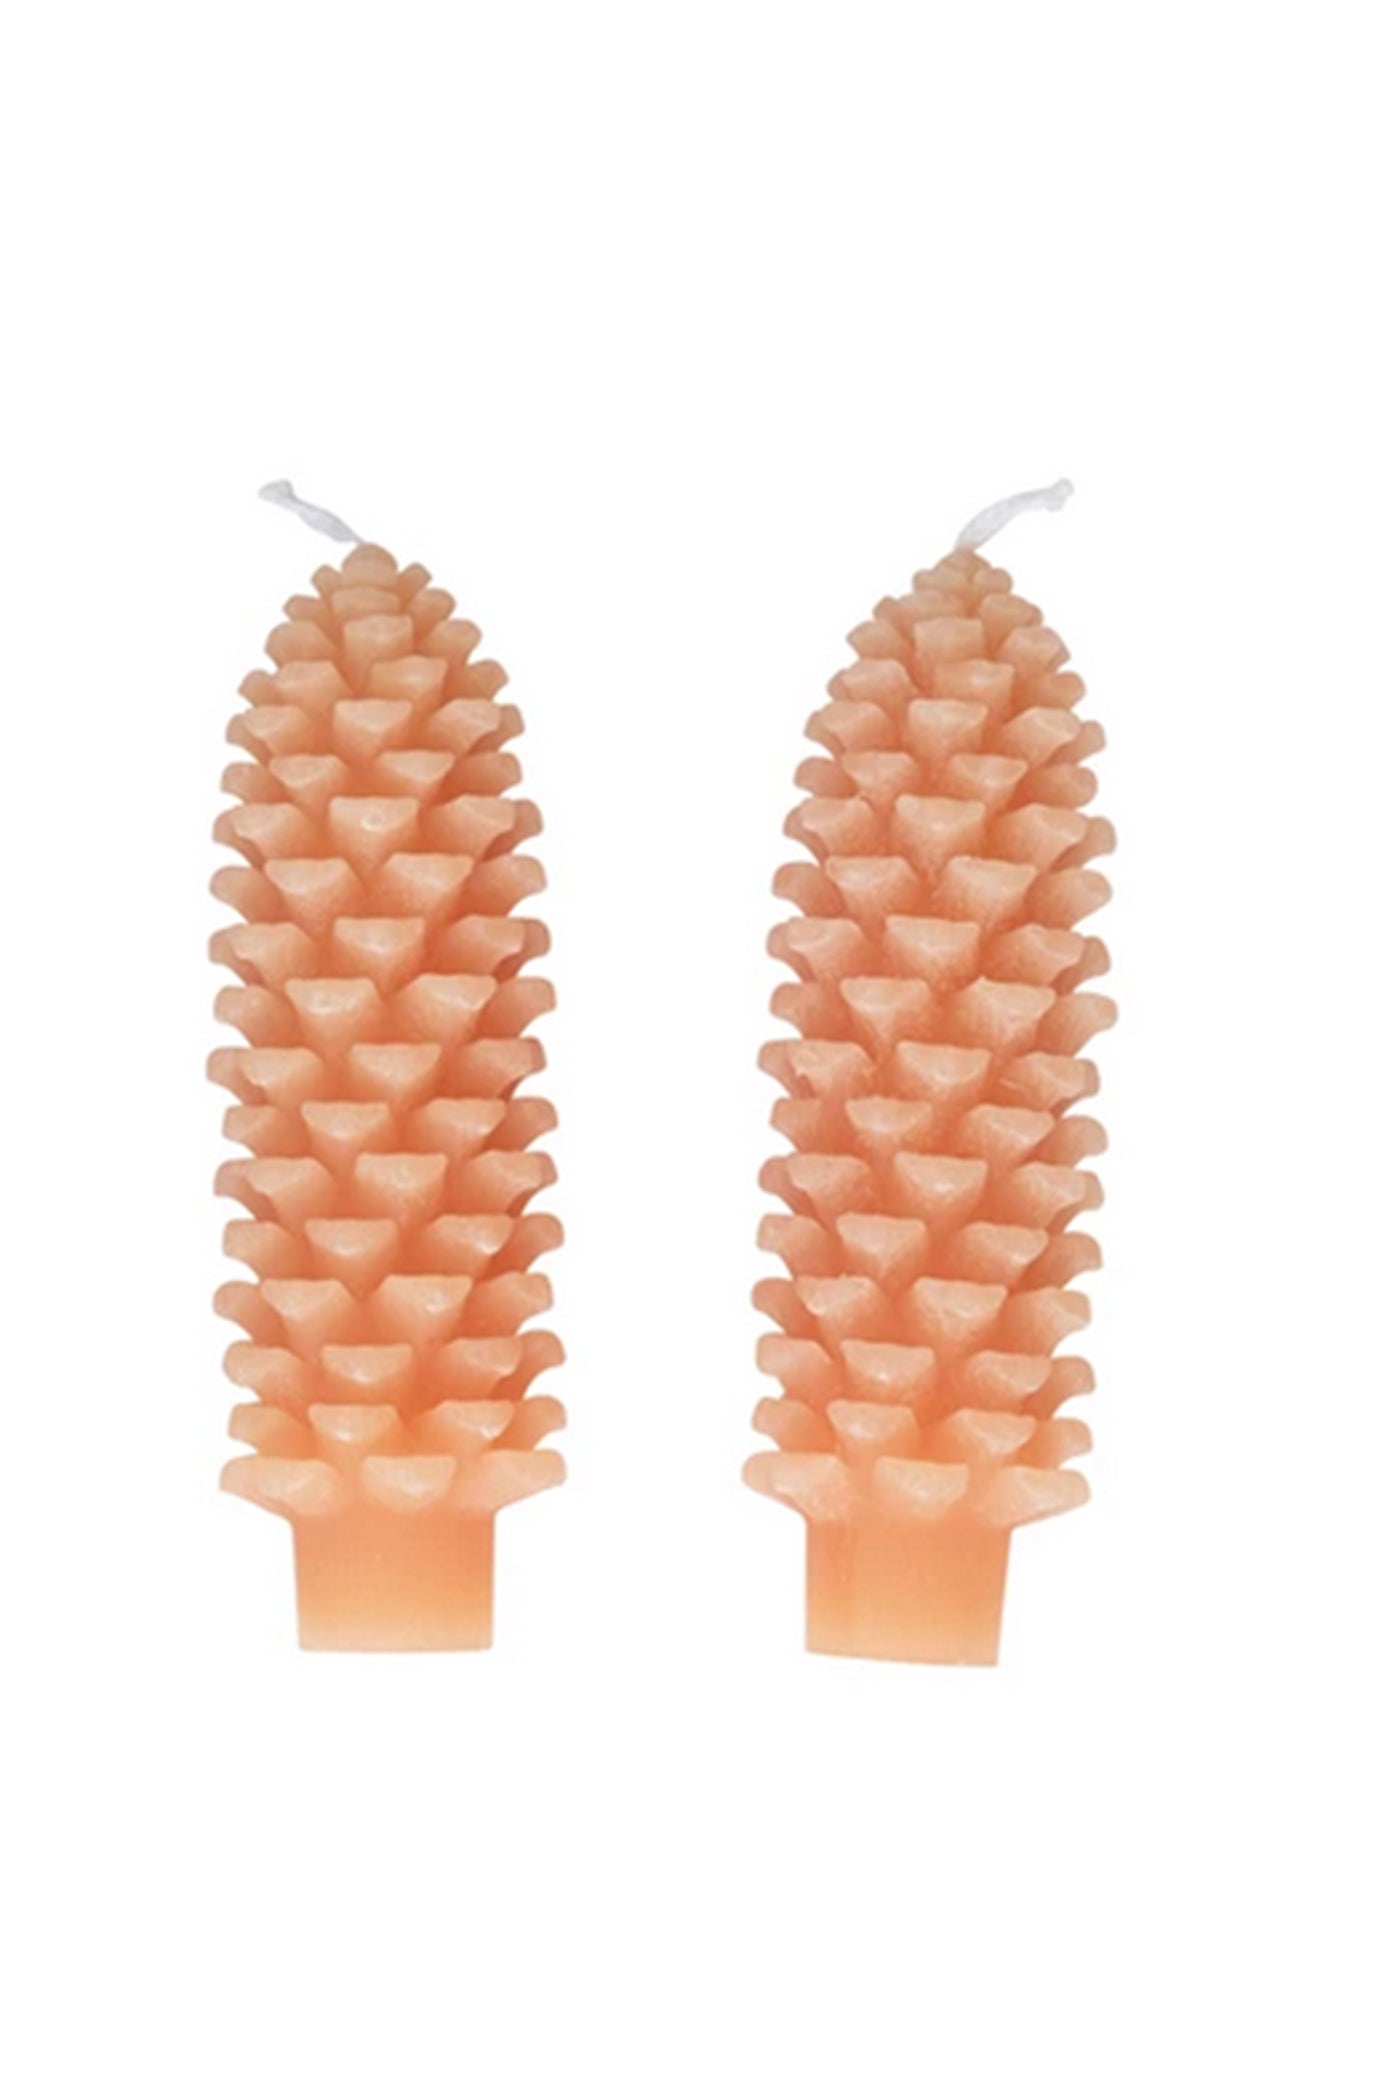 Unscented Pinecone Taper Candle